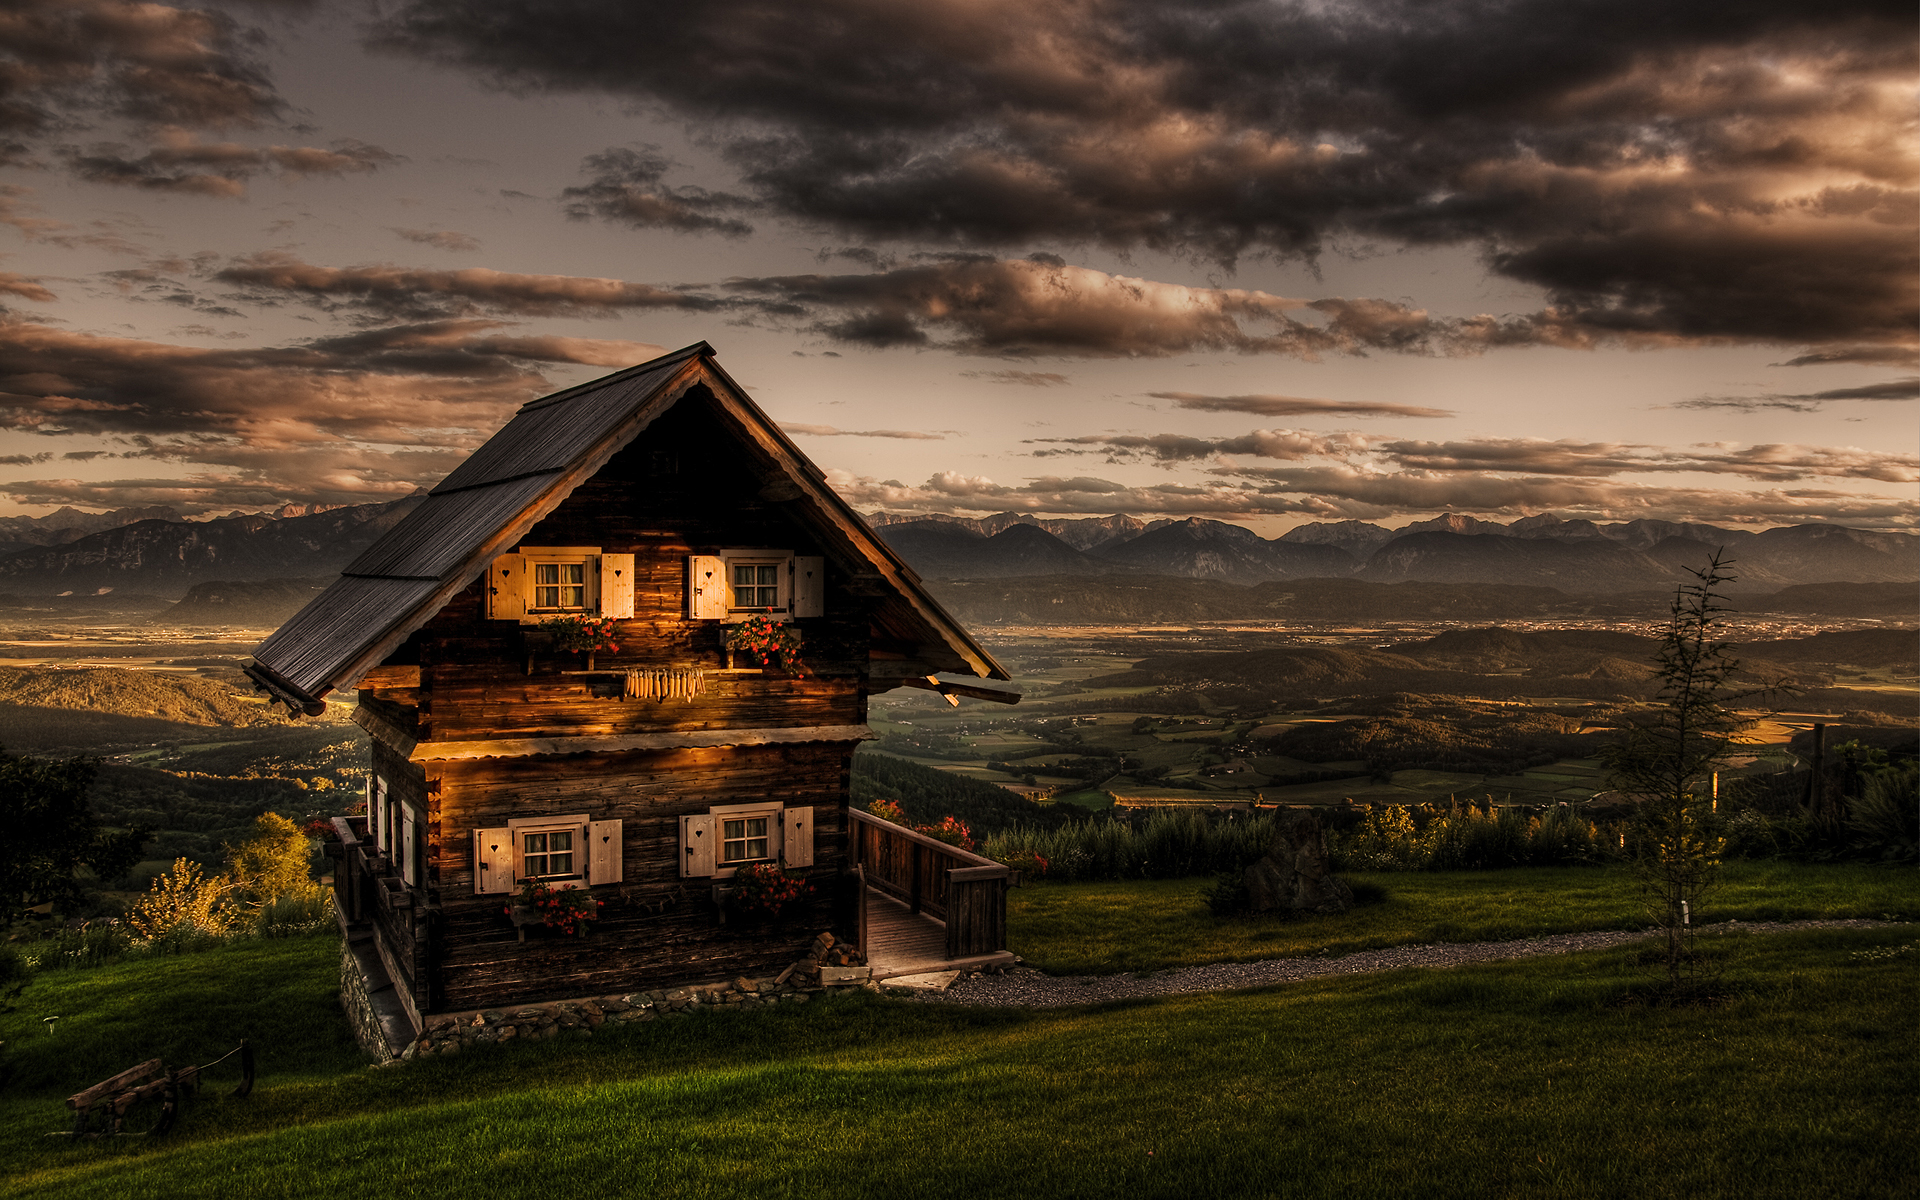 Romantic Cottage by pixelfly